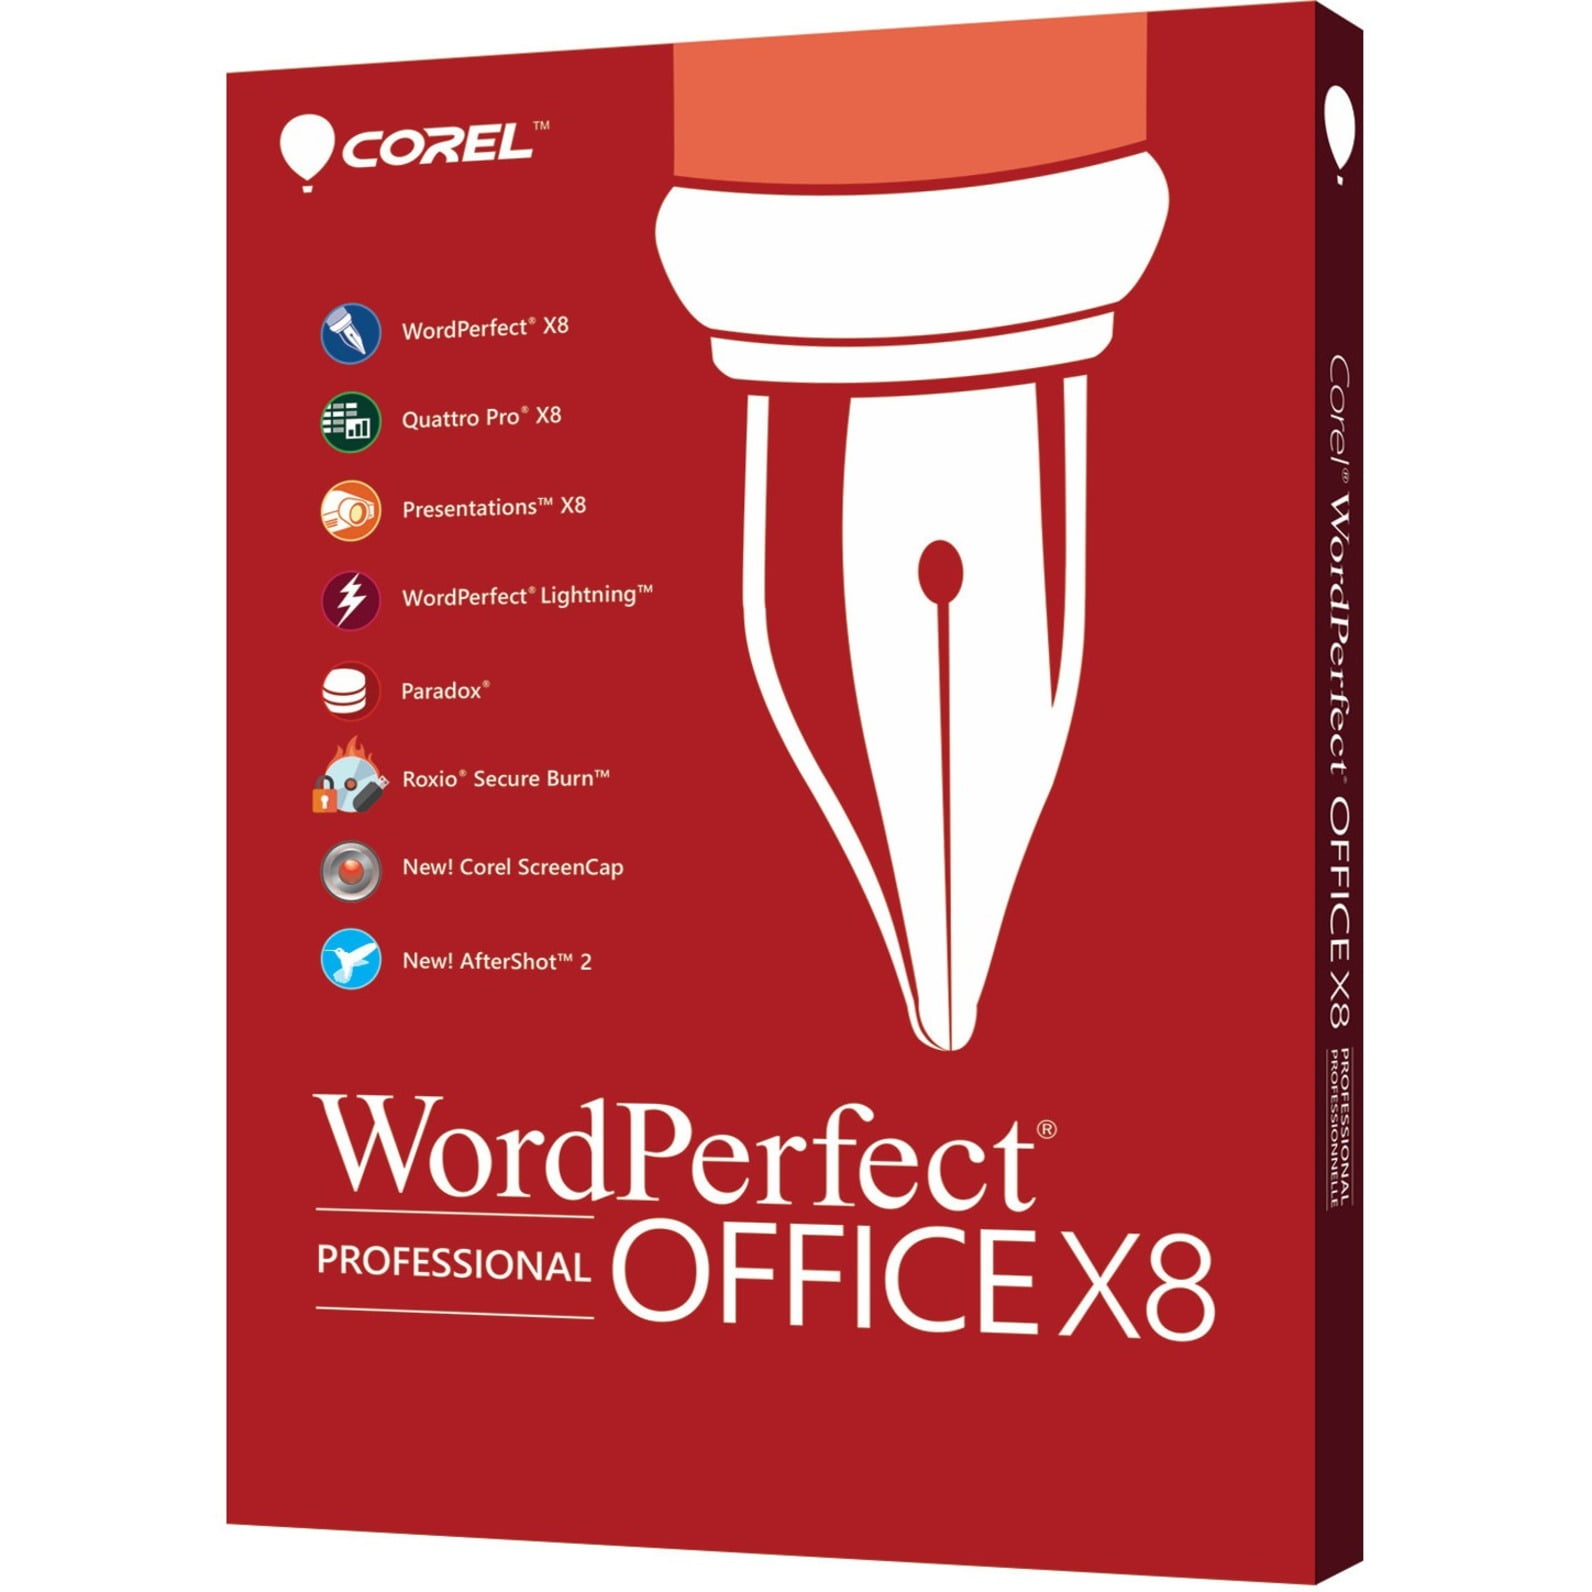 wordperfect office 12 standard edition trial